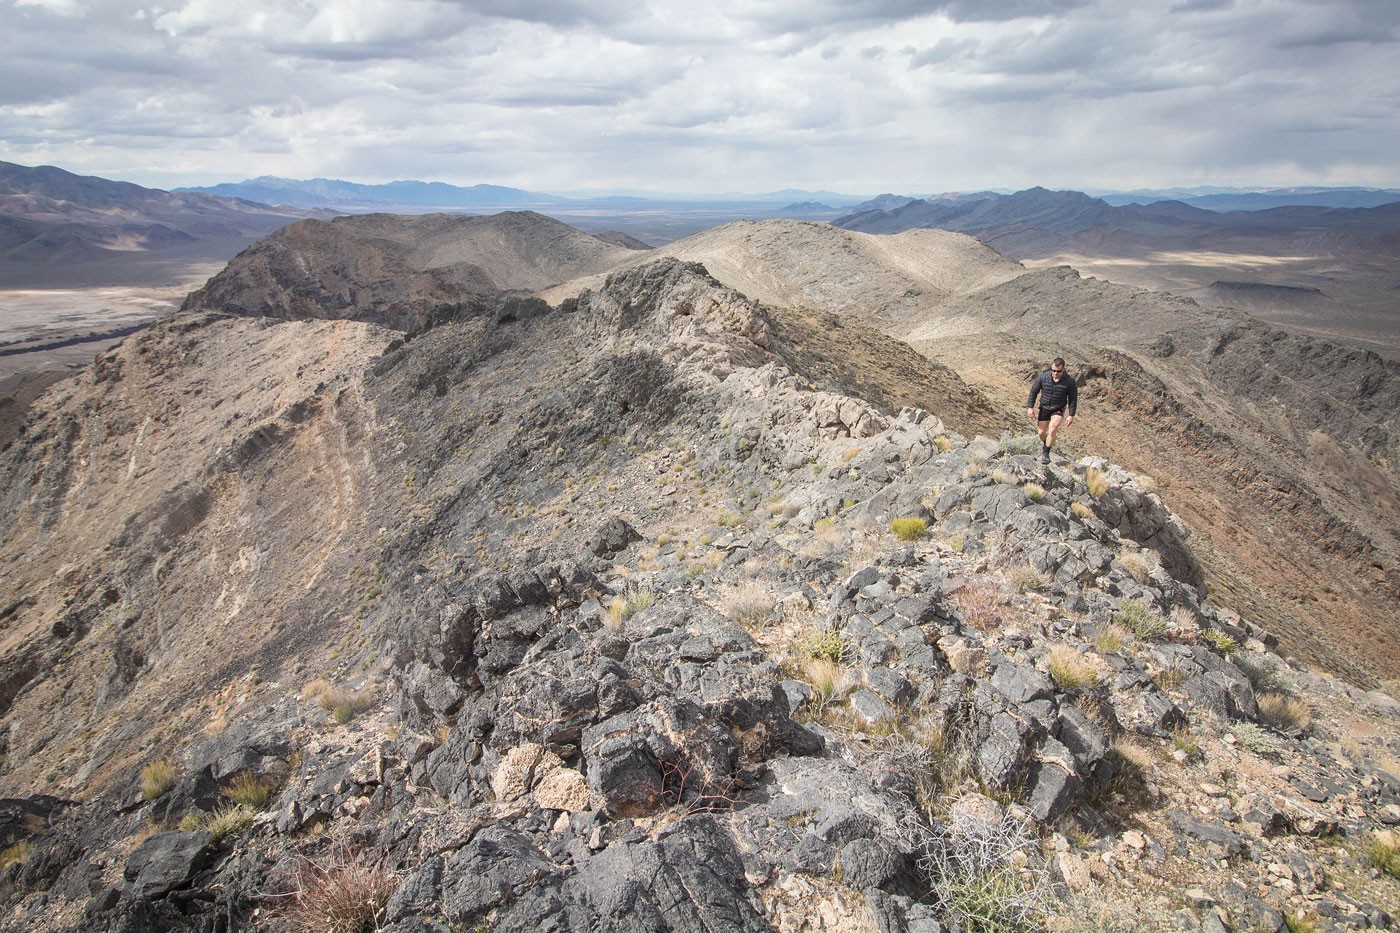 Hike High Peak in Southern Nevada District BLM, Nevada - Stav is Lost